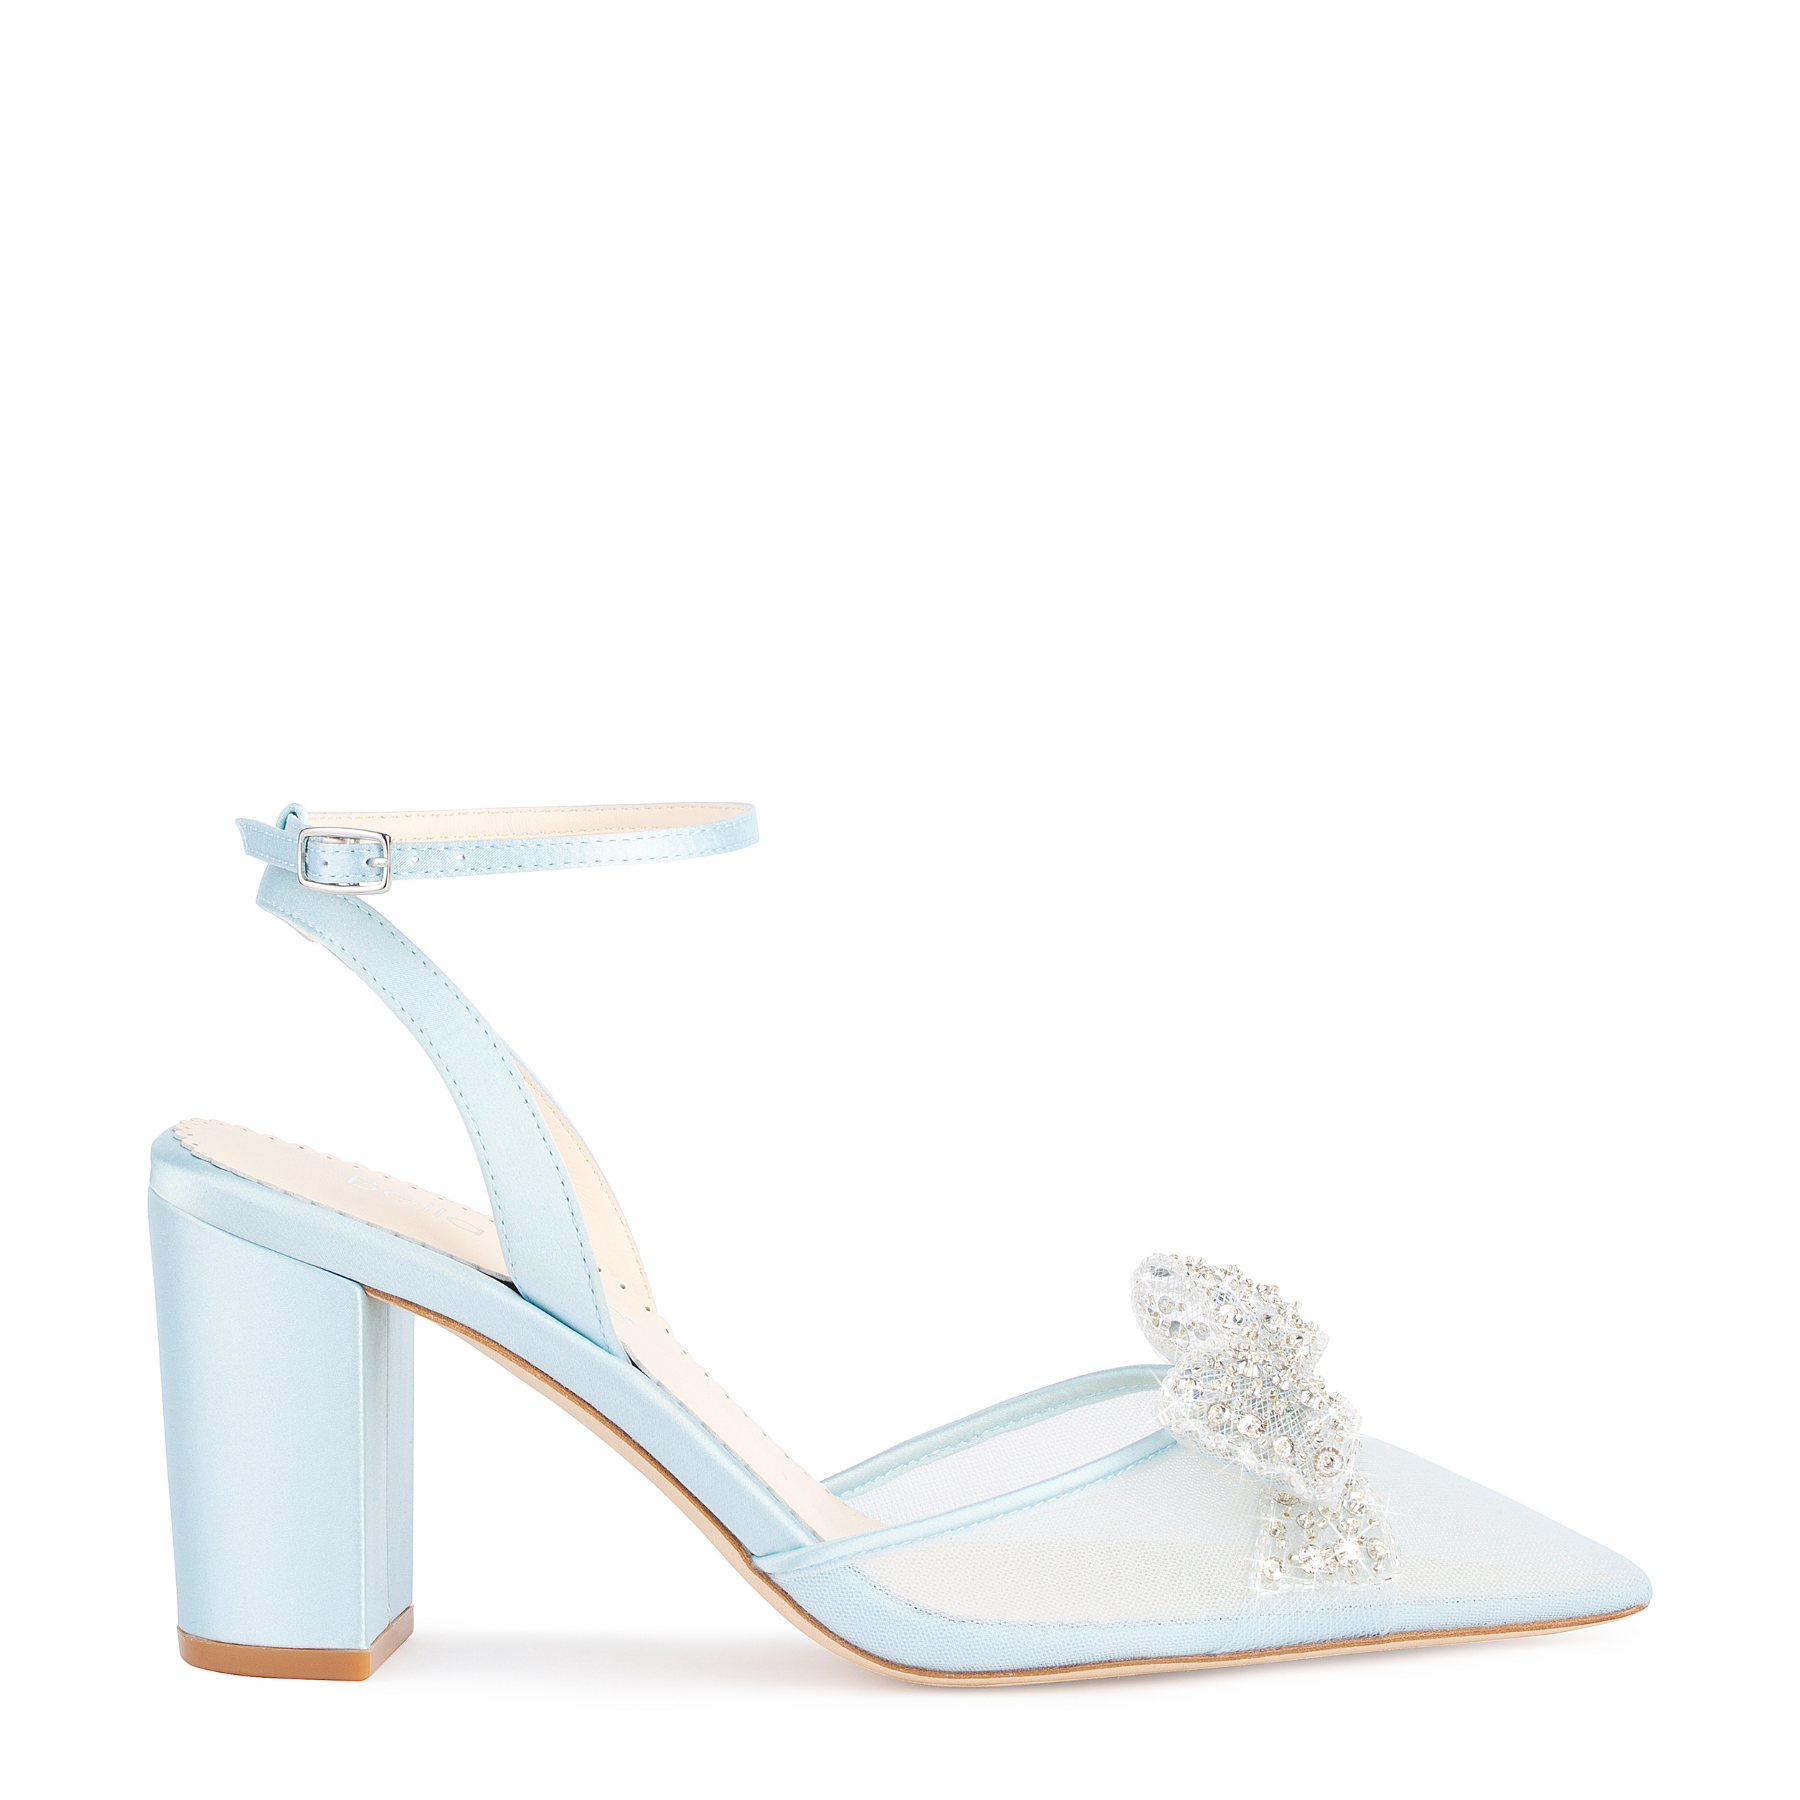 The 15 Best White Wedding Shoes for Your Bridal Style